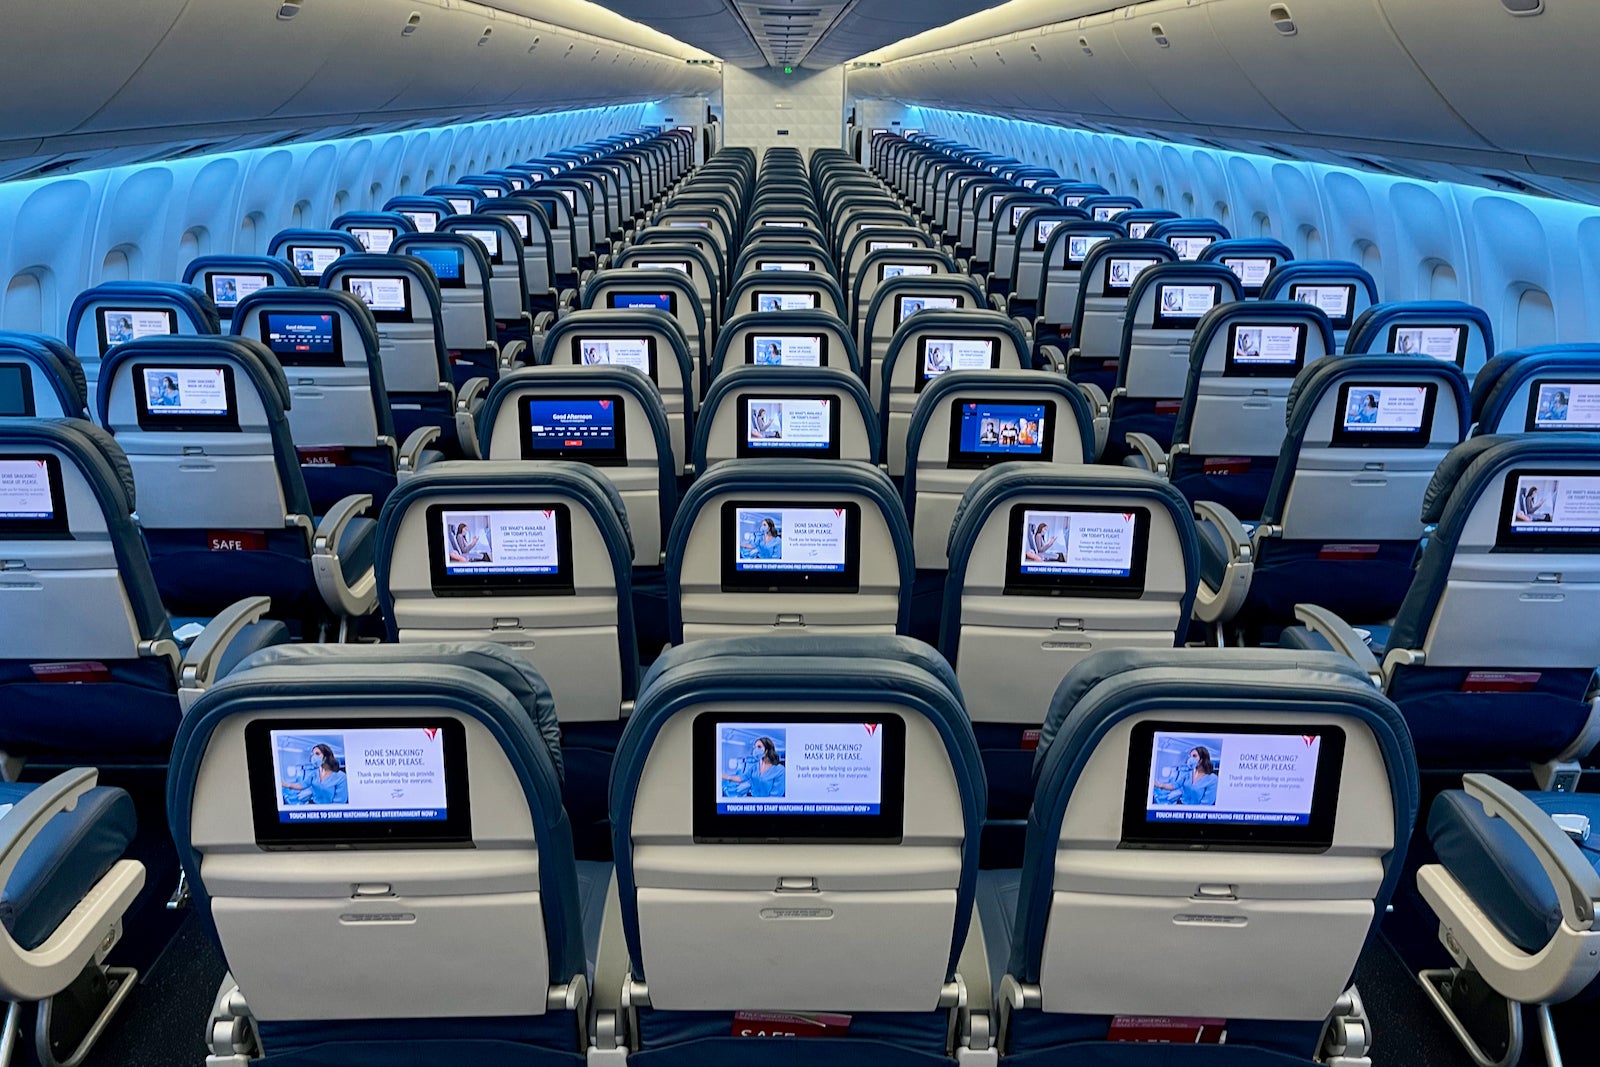 File:Continental Airlines 767-400ER economy cabin.jpg - Wikipedia